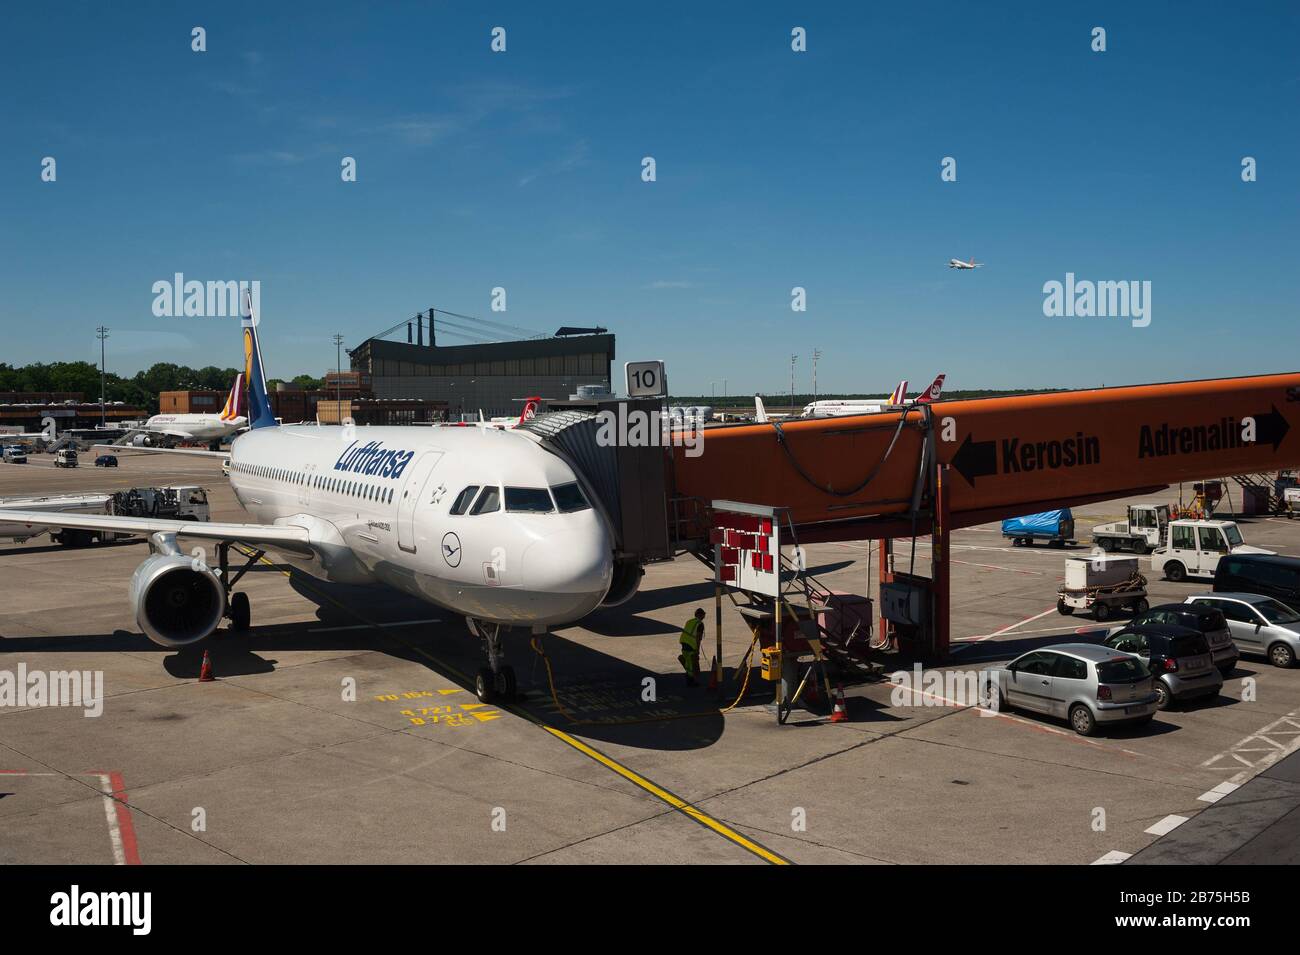 02.06.2017, Berlin, Germany, Europe - A Lufthansa passenger aircraft is parked at a gate at Berlin's Tegel Airport. Lufthansa is a member of the Star Alliance, an international network of airlines. [automated translation] Stock Photo